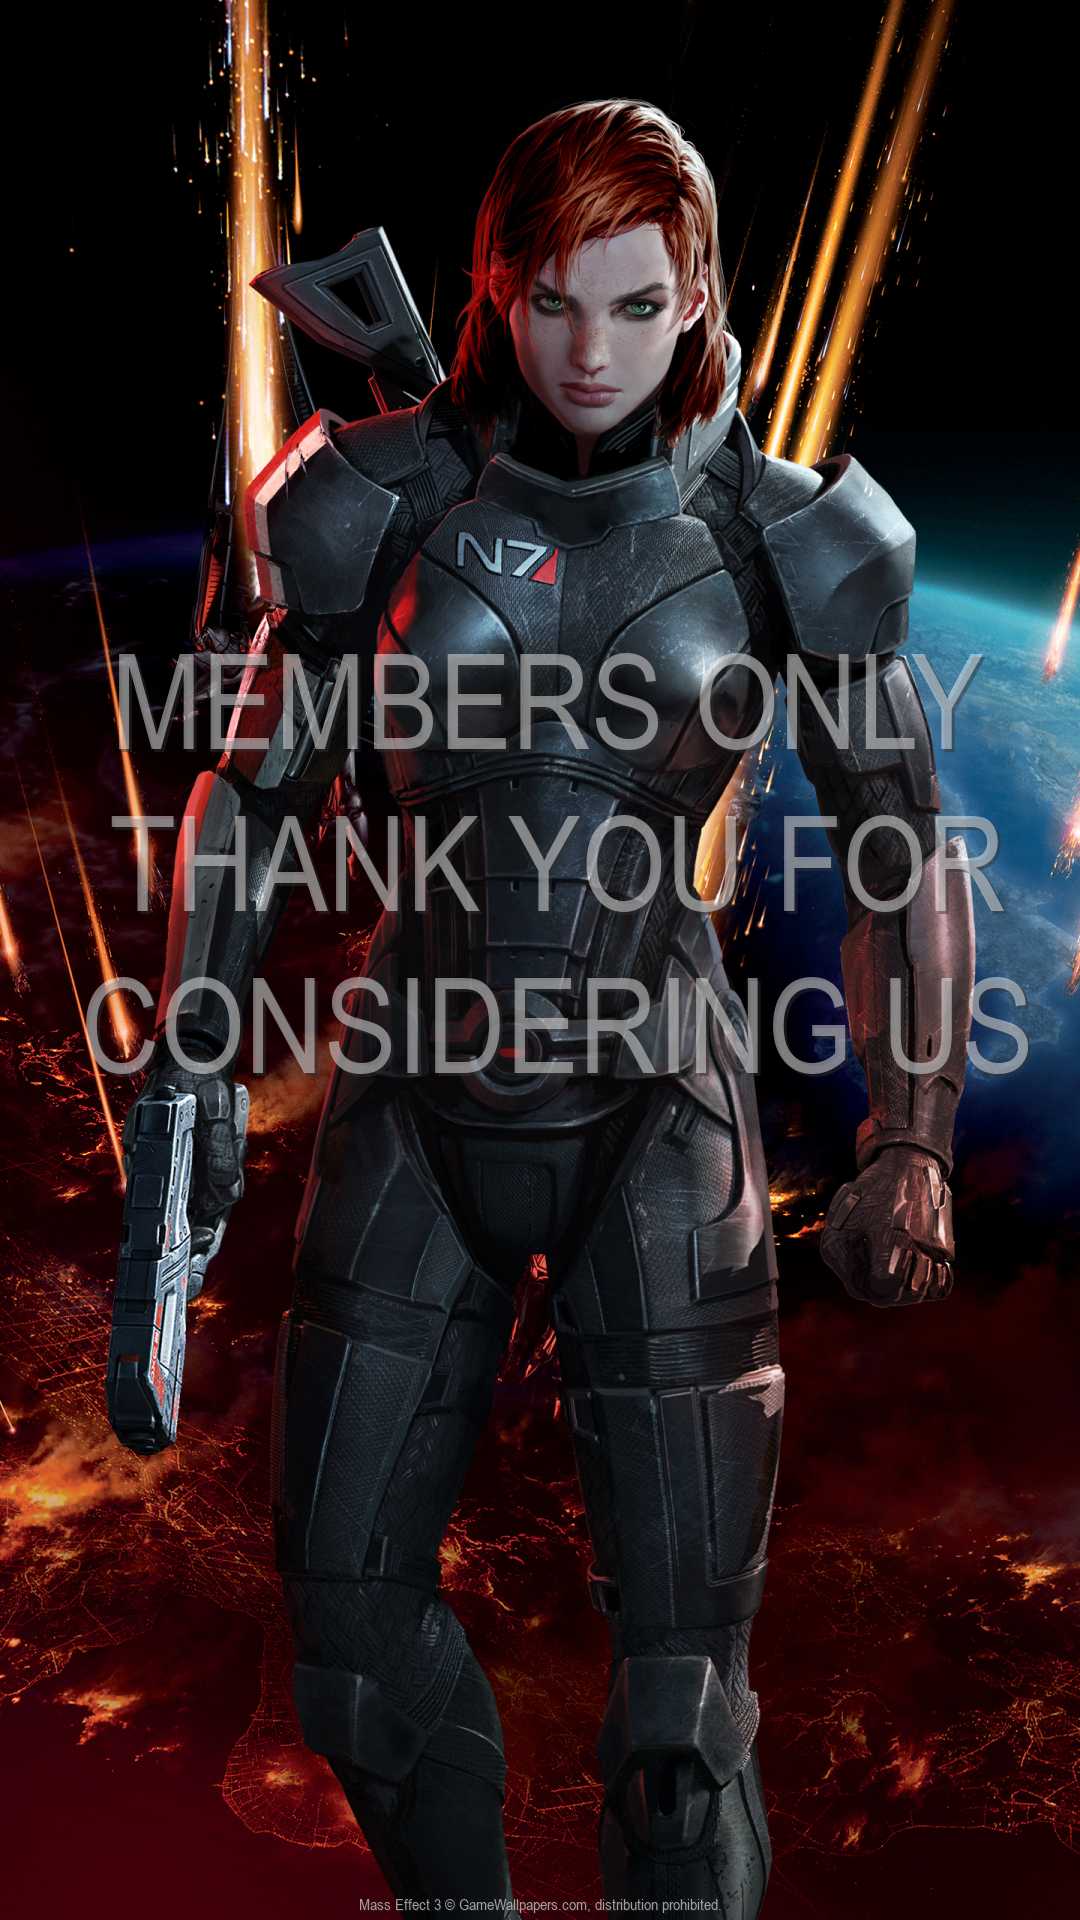 Mass Effect 3 1080p Vertical Mobile wallpaper or background 11